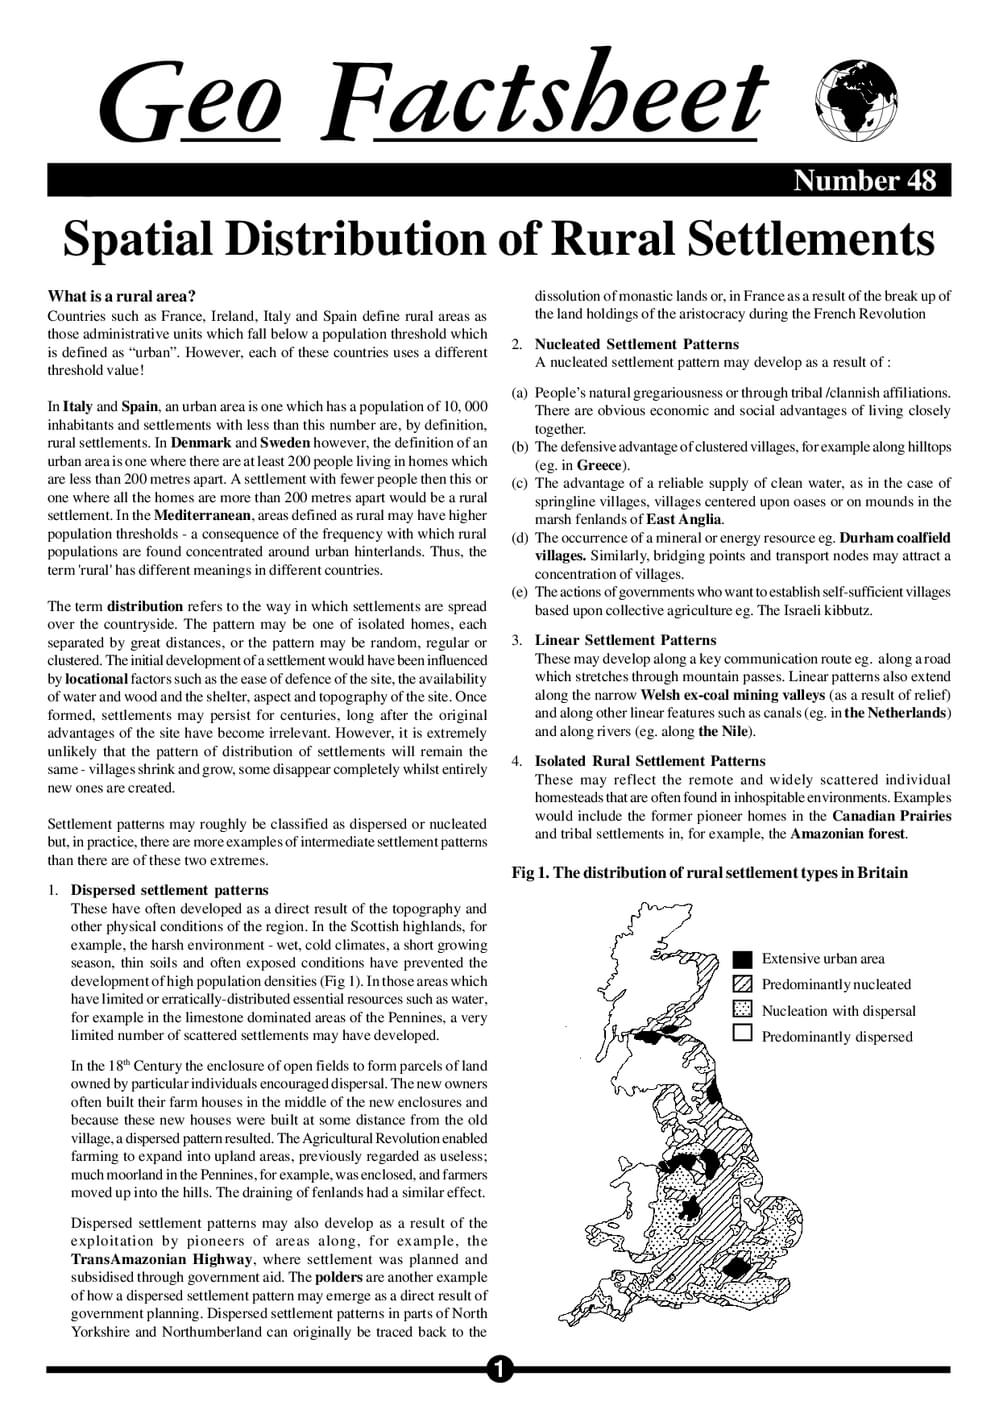 048 Spatail Distribution Rural Settlements